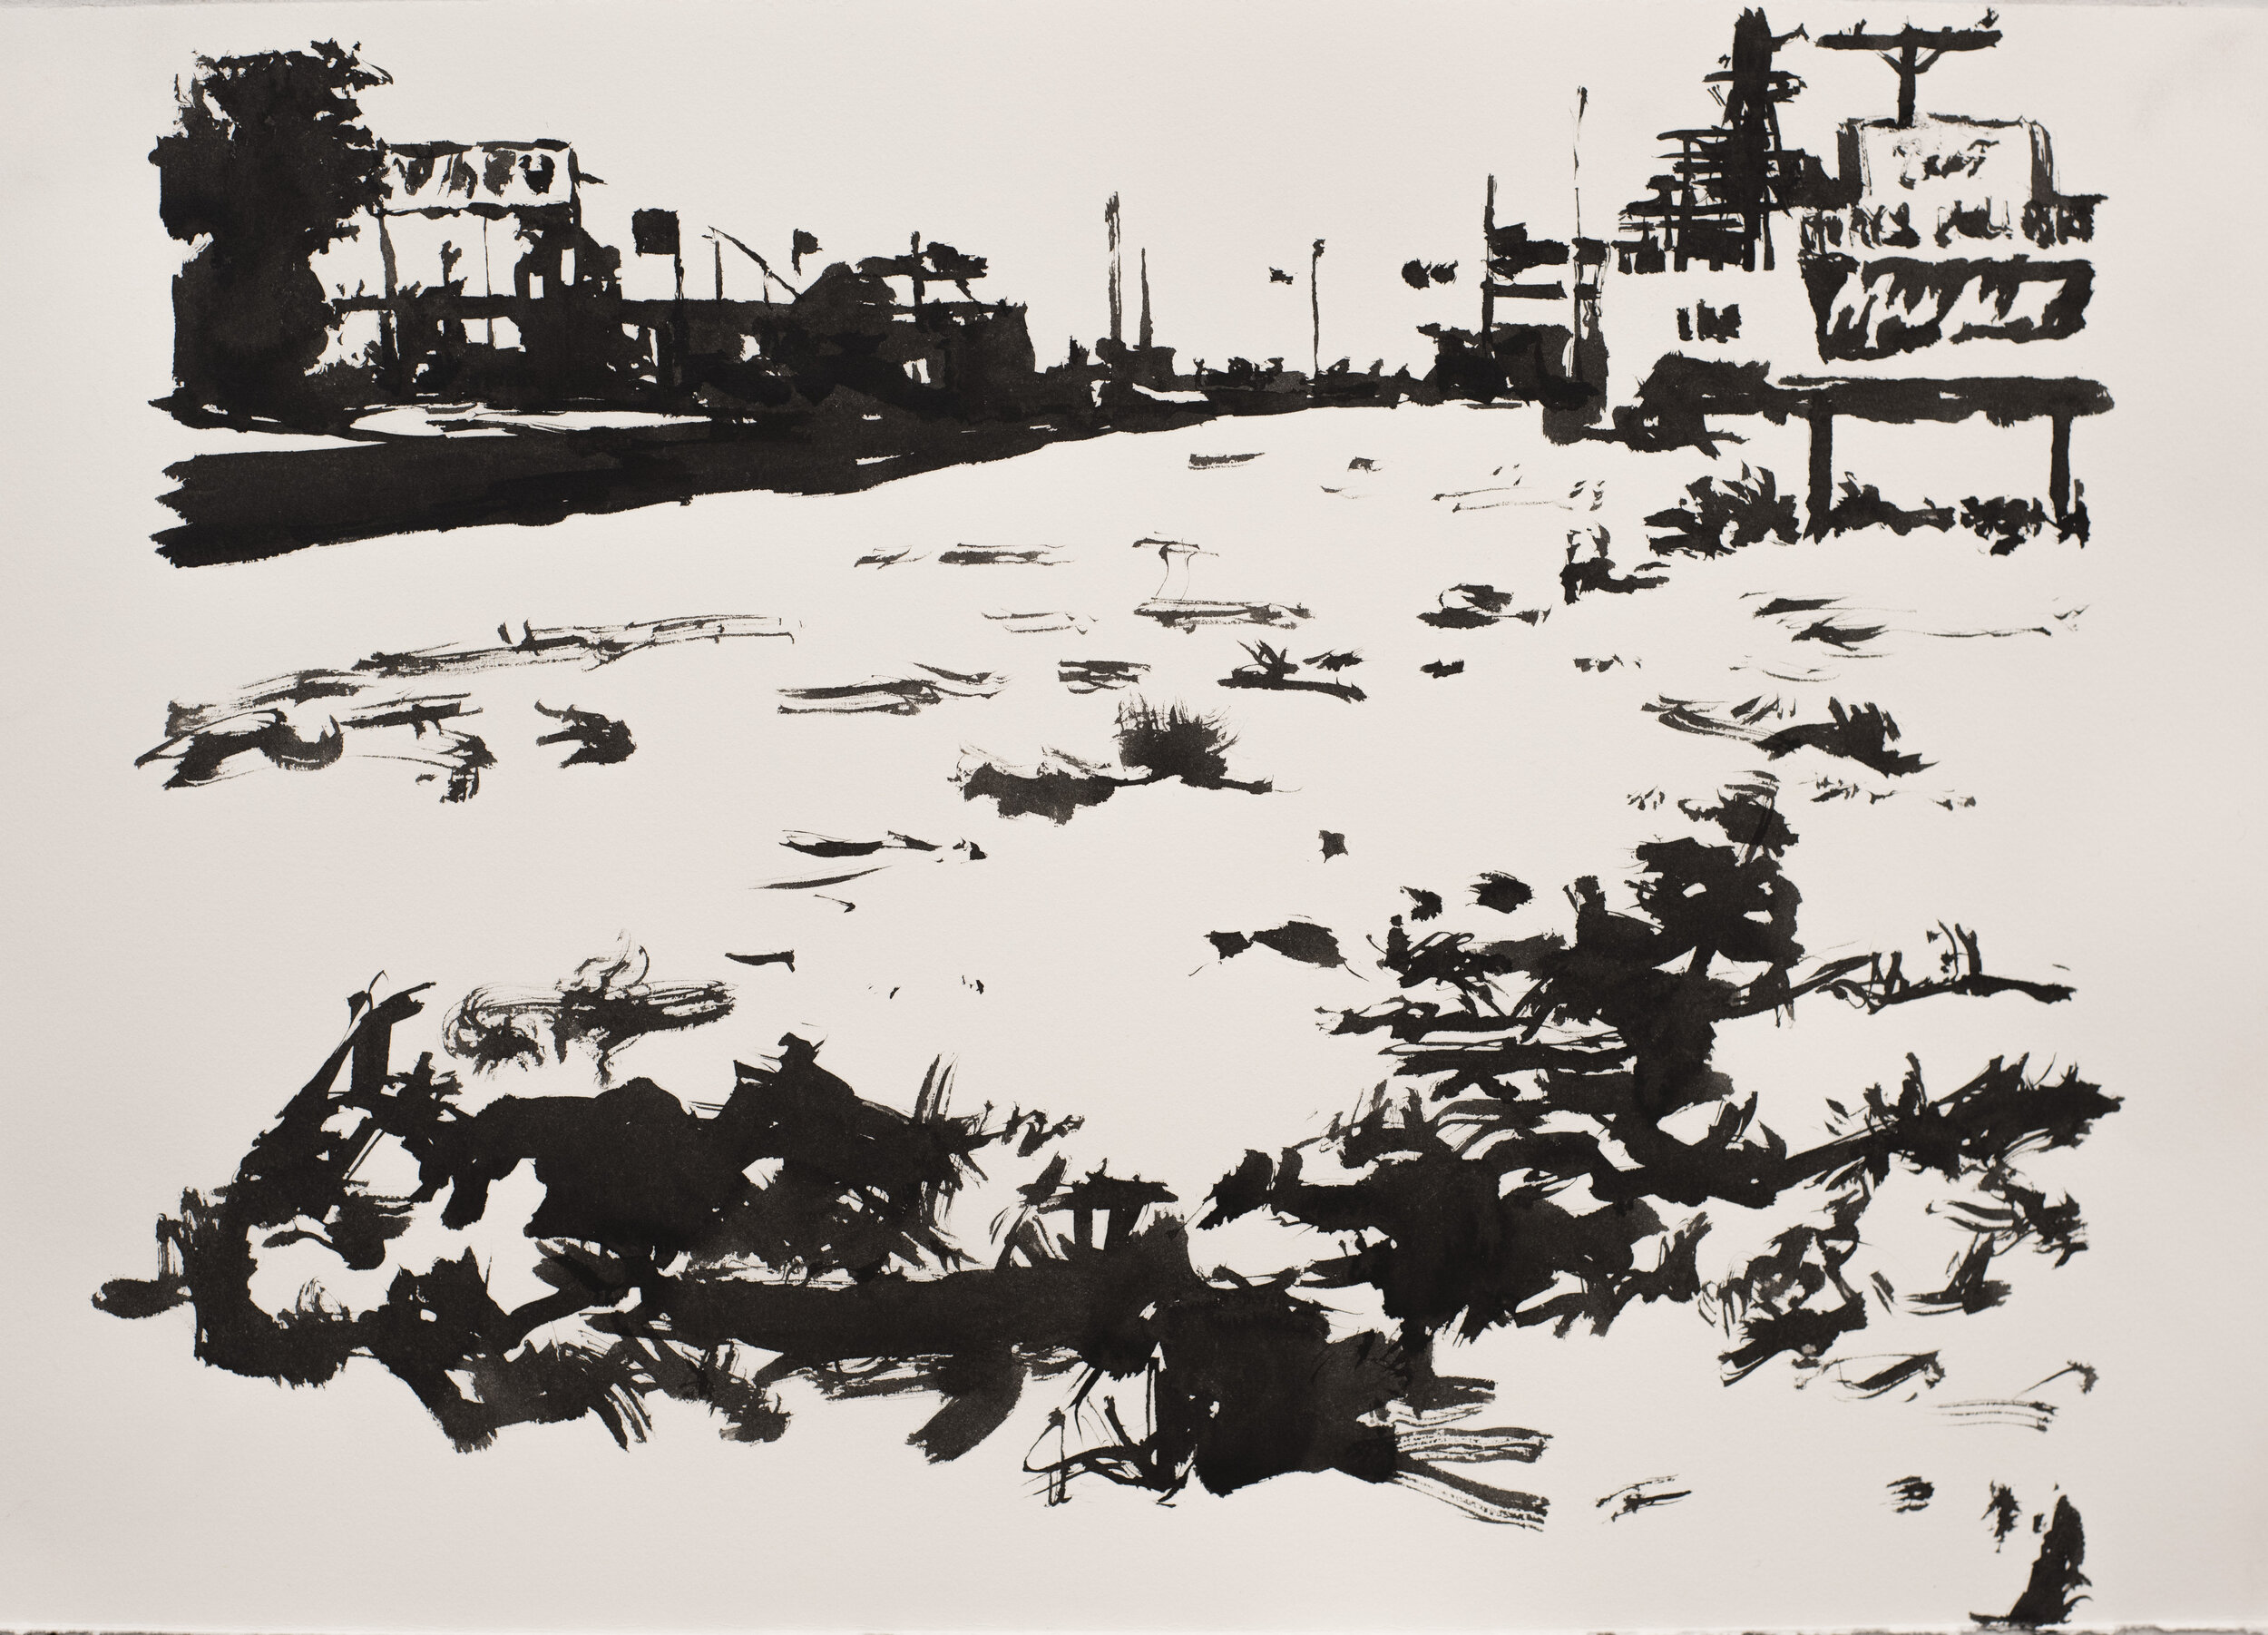  Roadway Horizon #3, india ink on paper, 15 x 22 inches, 2020 